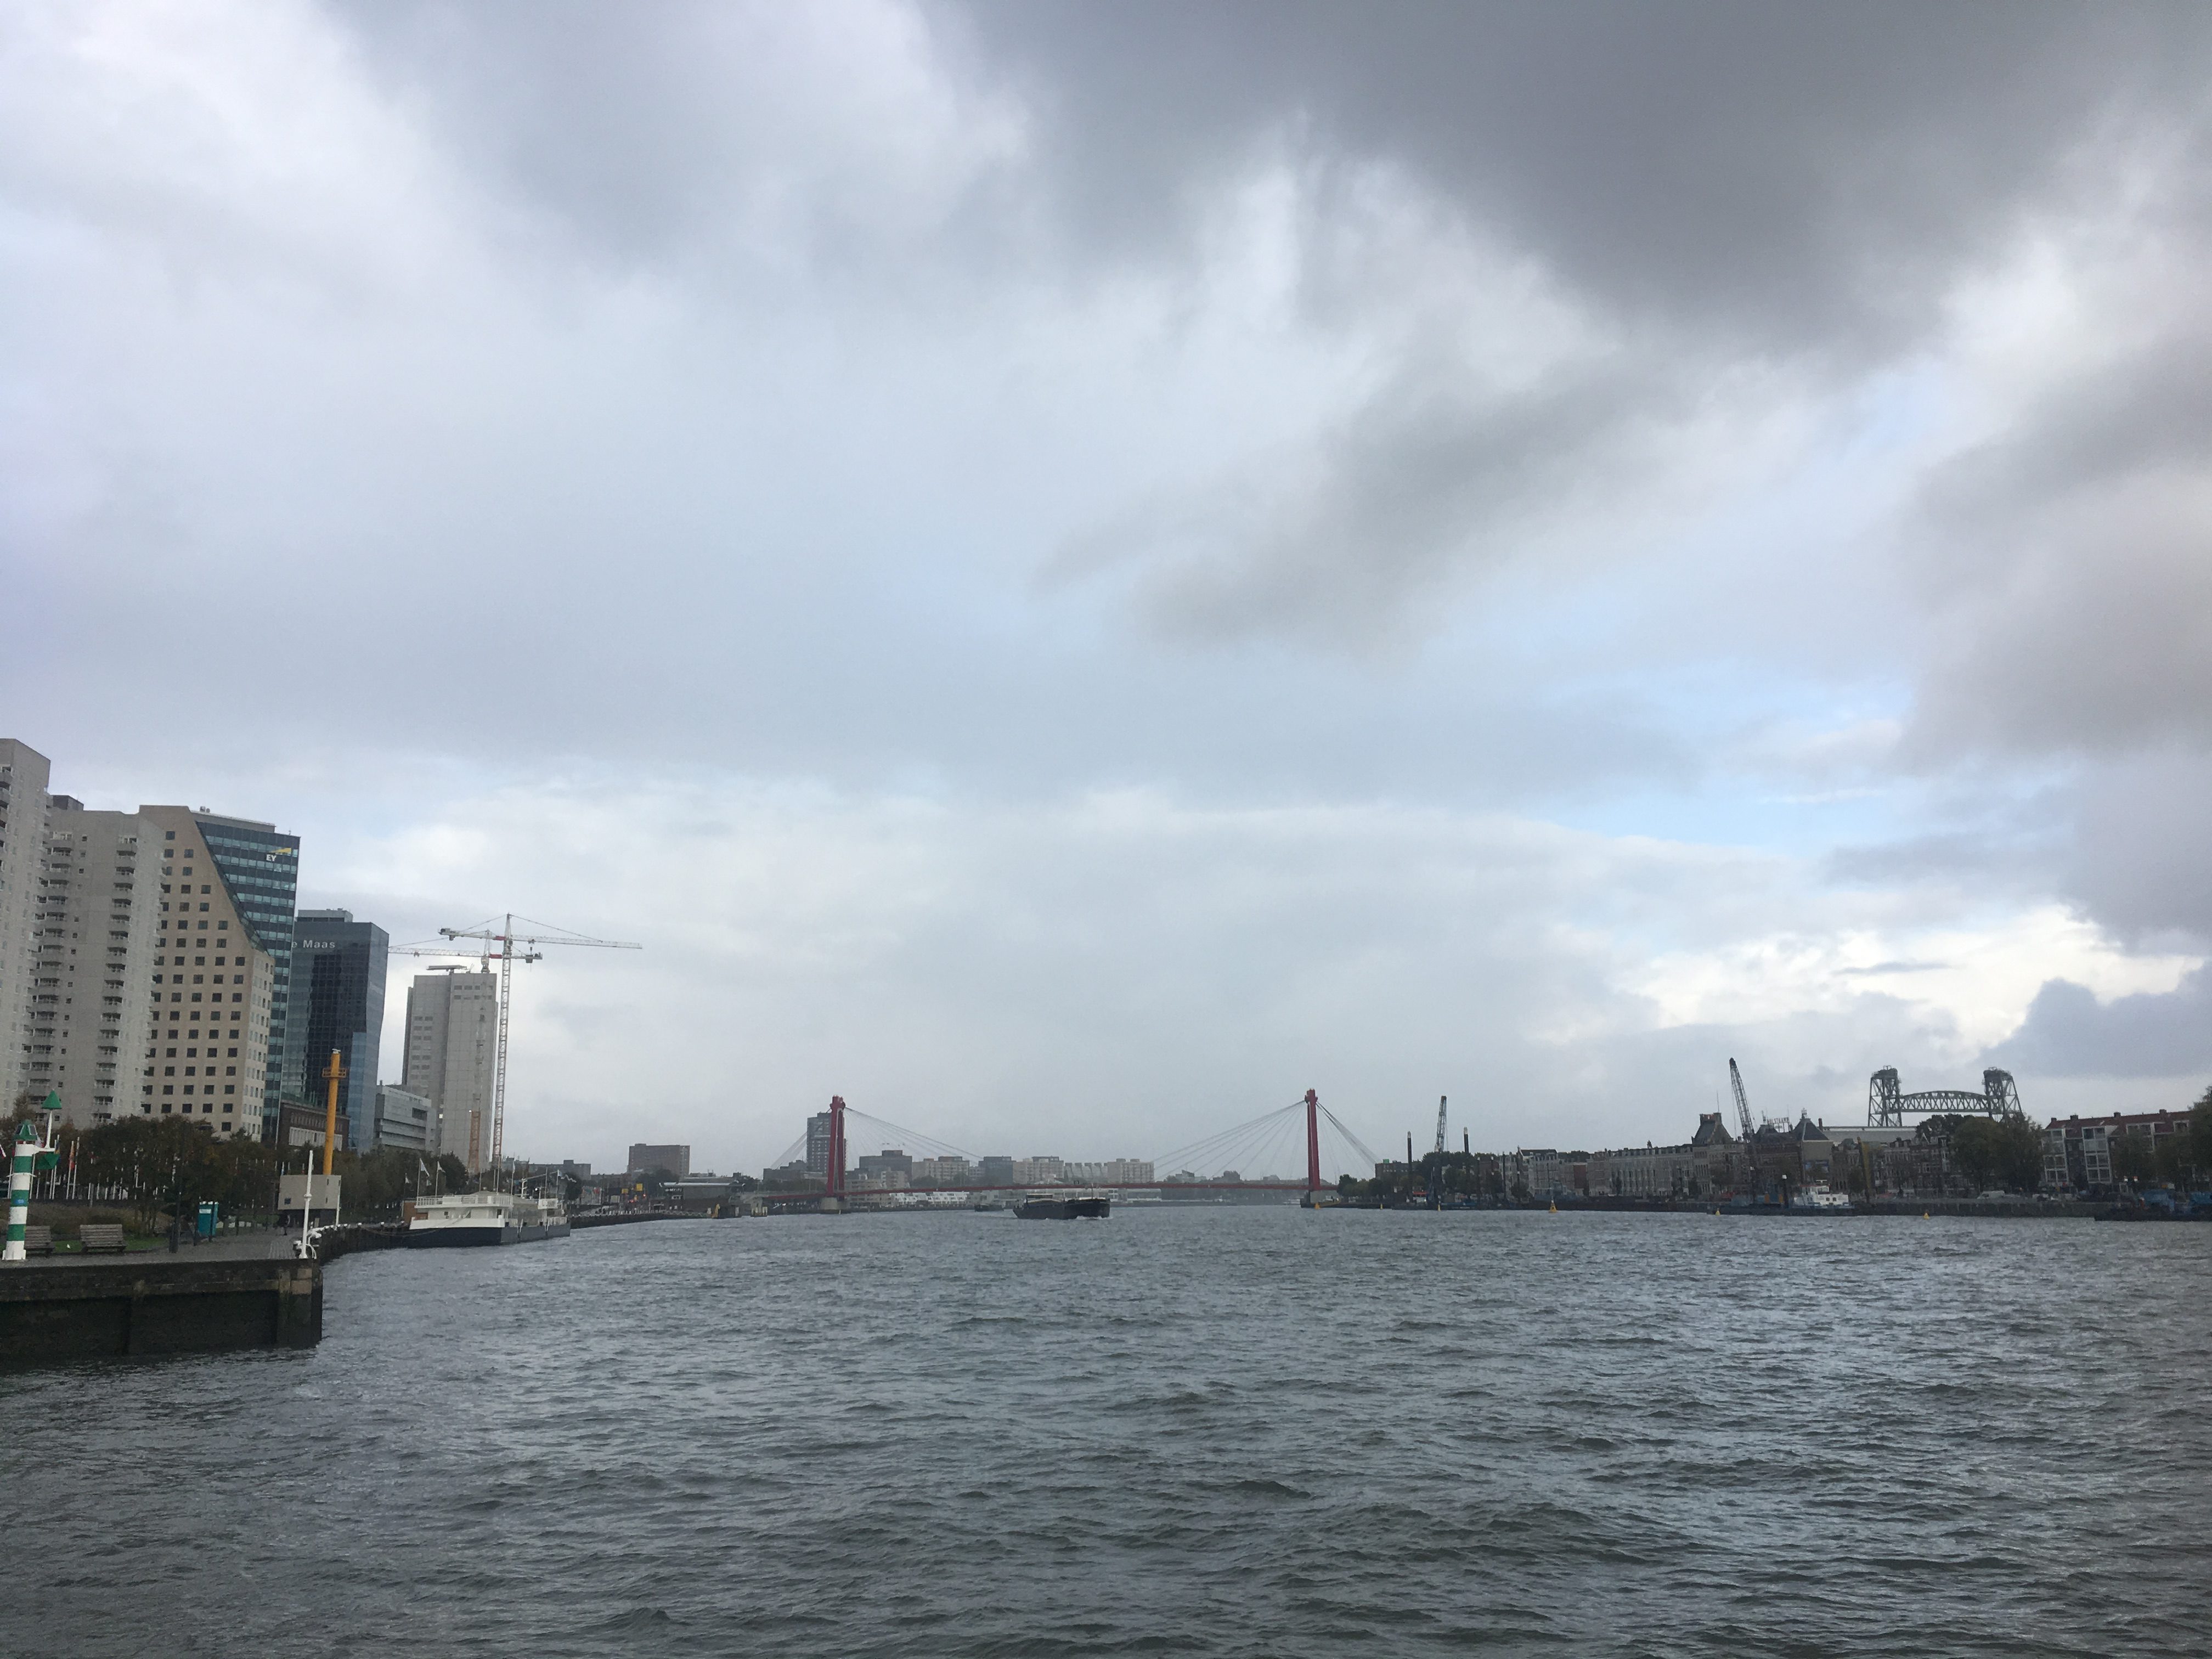 Rotterdam harbour is one of the biggest in the world